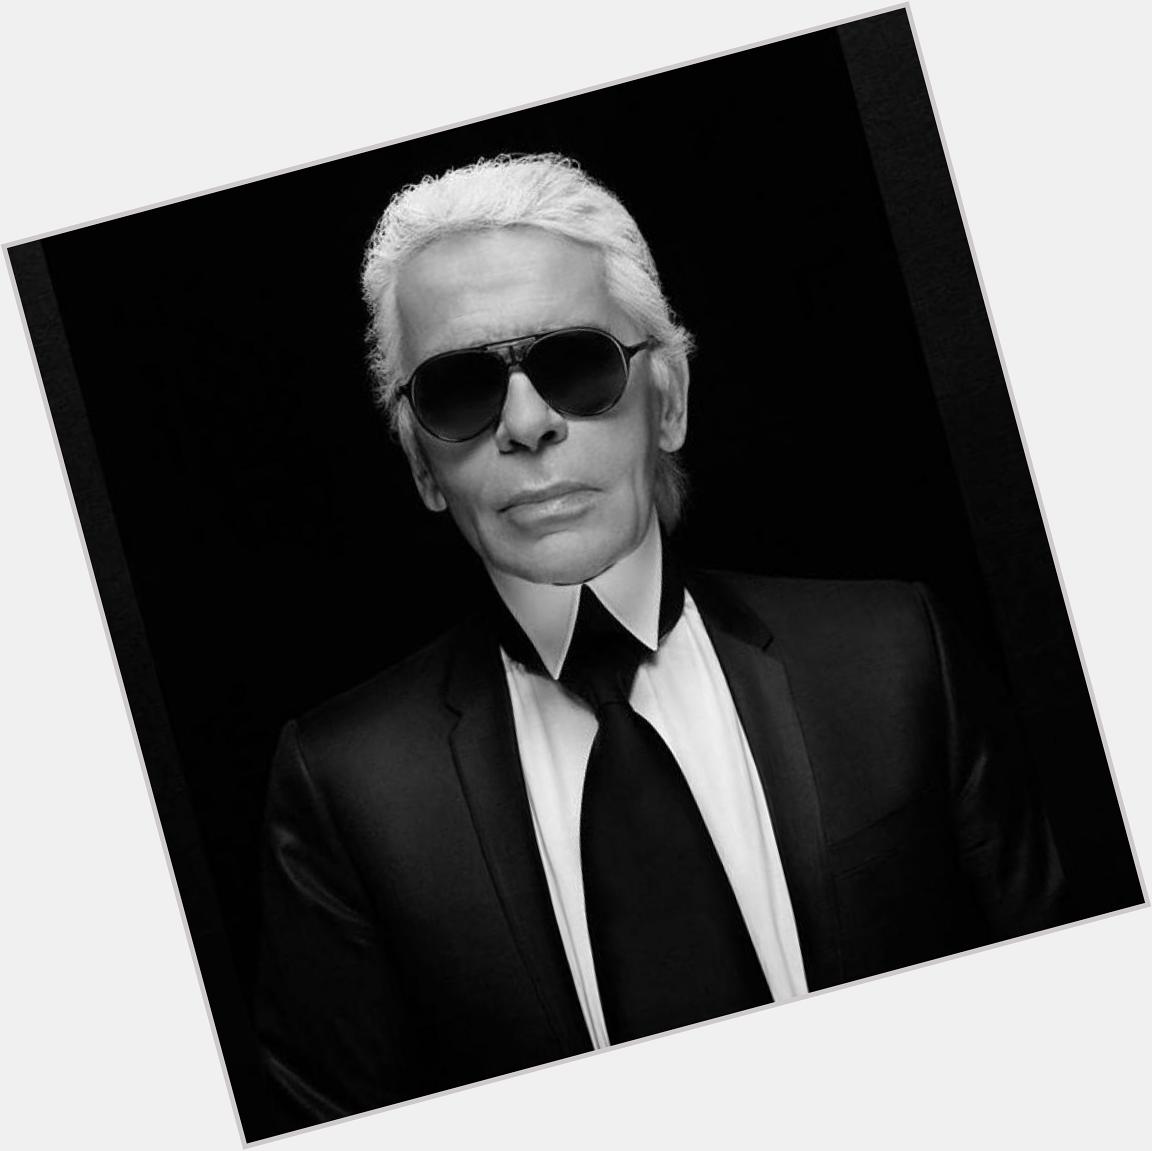  Happy Birthday to iconic Designer Karl Lagerfeld  who turns 82 years young today.  